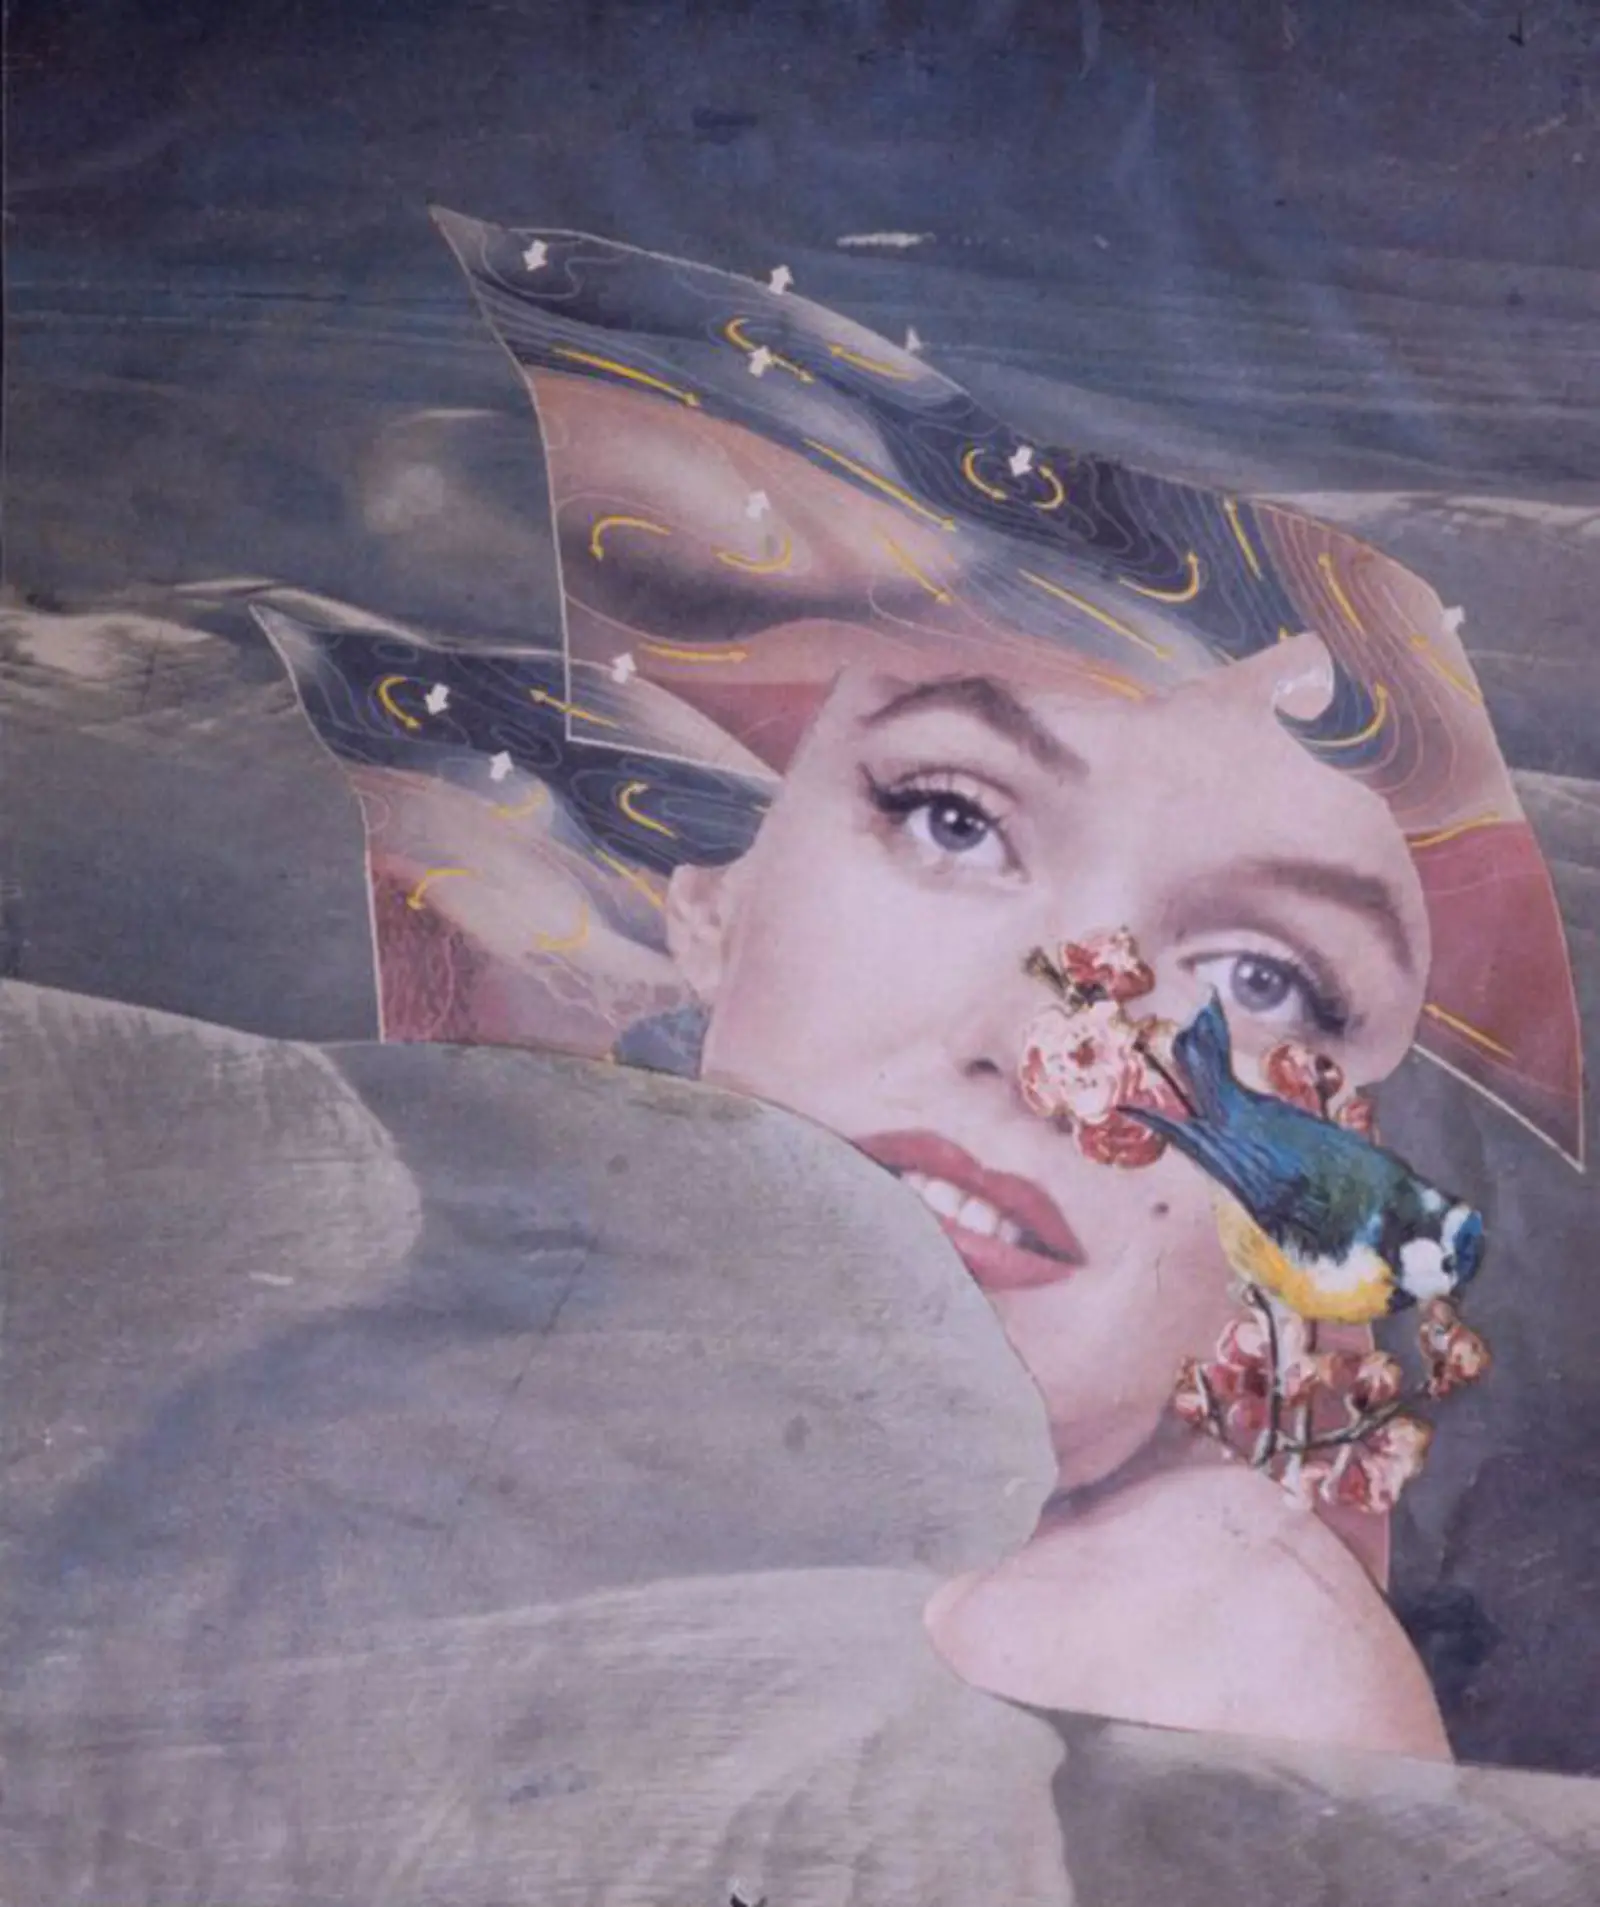 A collage featuring Marilyn Monroe, with flowers, in an abstract environment.